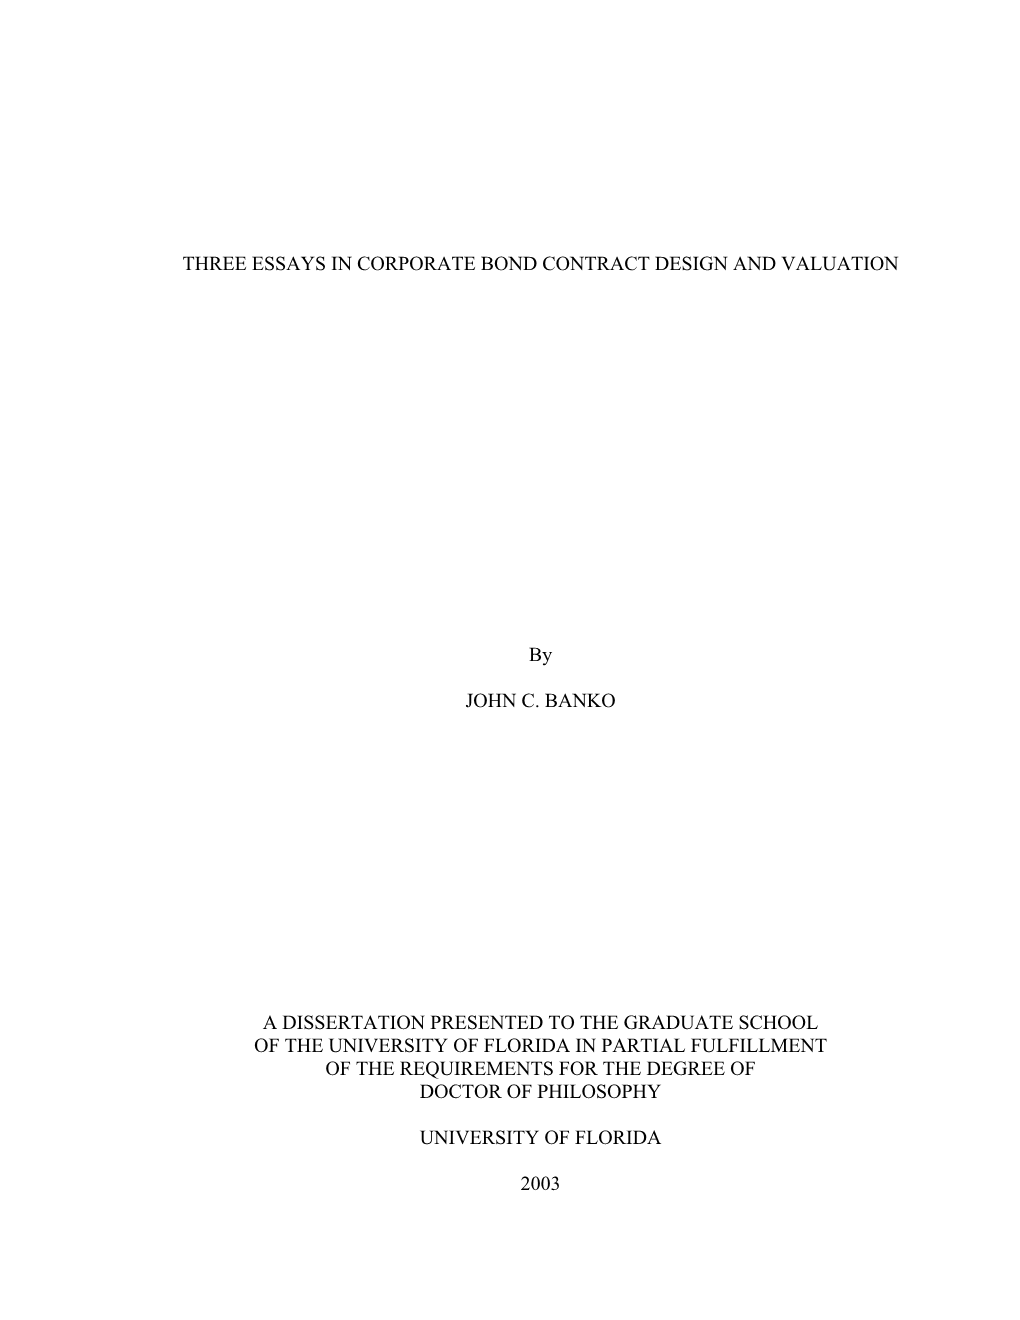 Three Essays in Corporate Bond Contract Design and Valuation